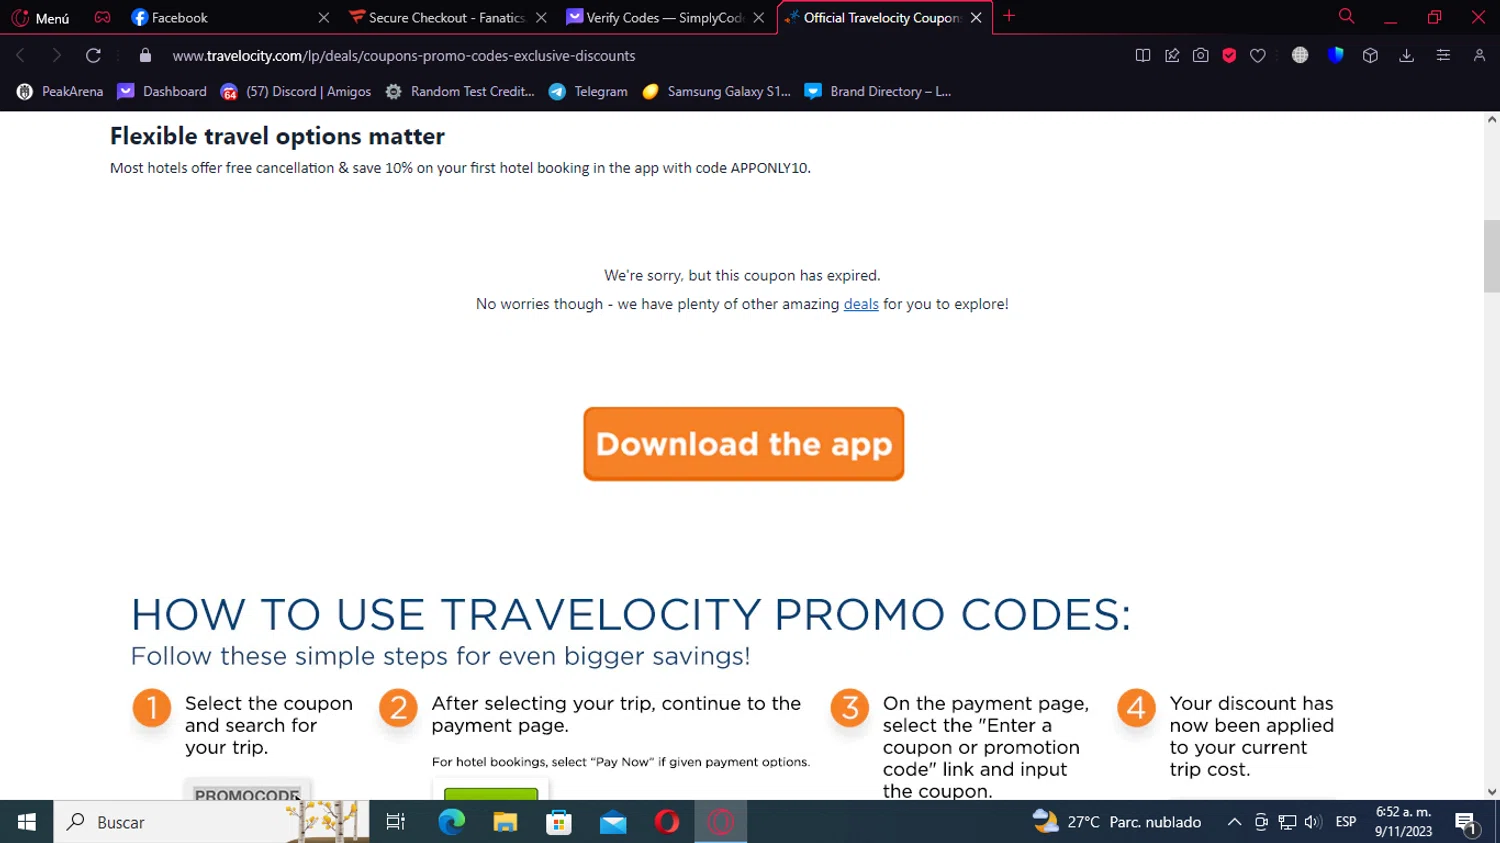 Official Travelocity Coupons, Promo Codes & Discounts 2020